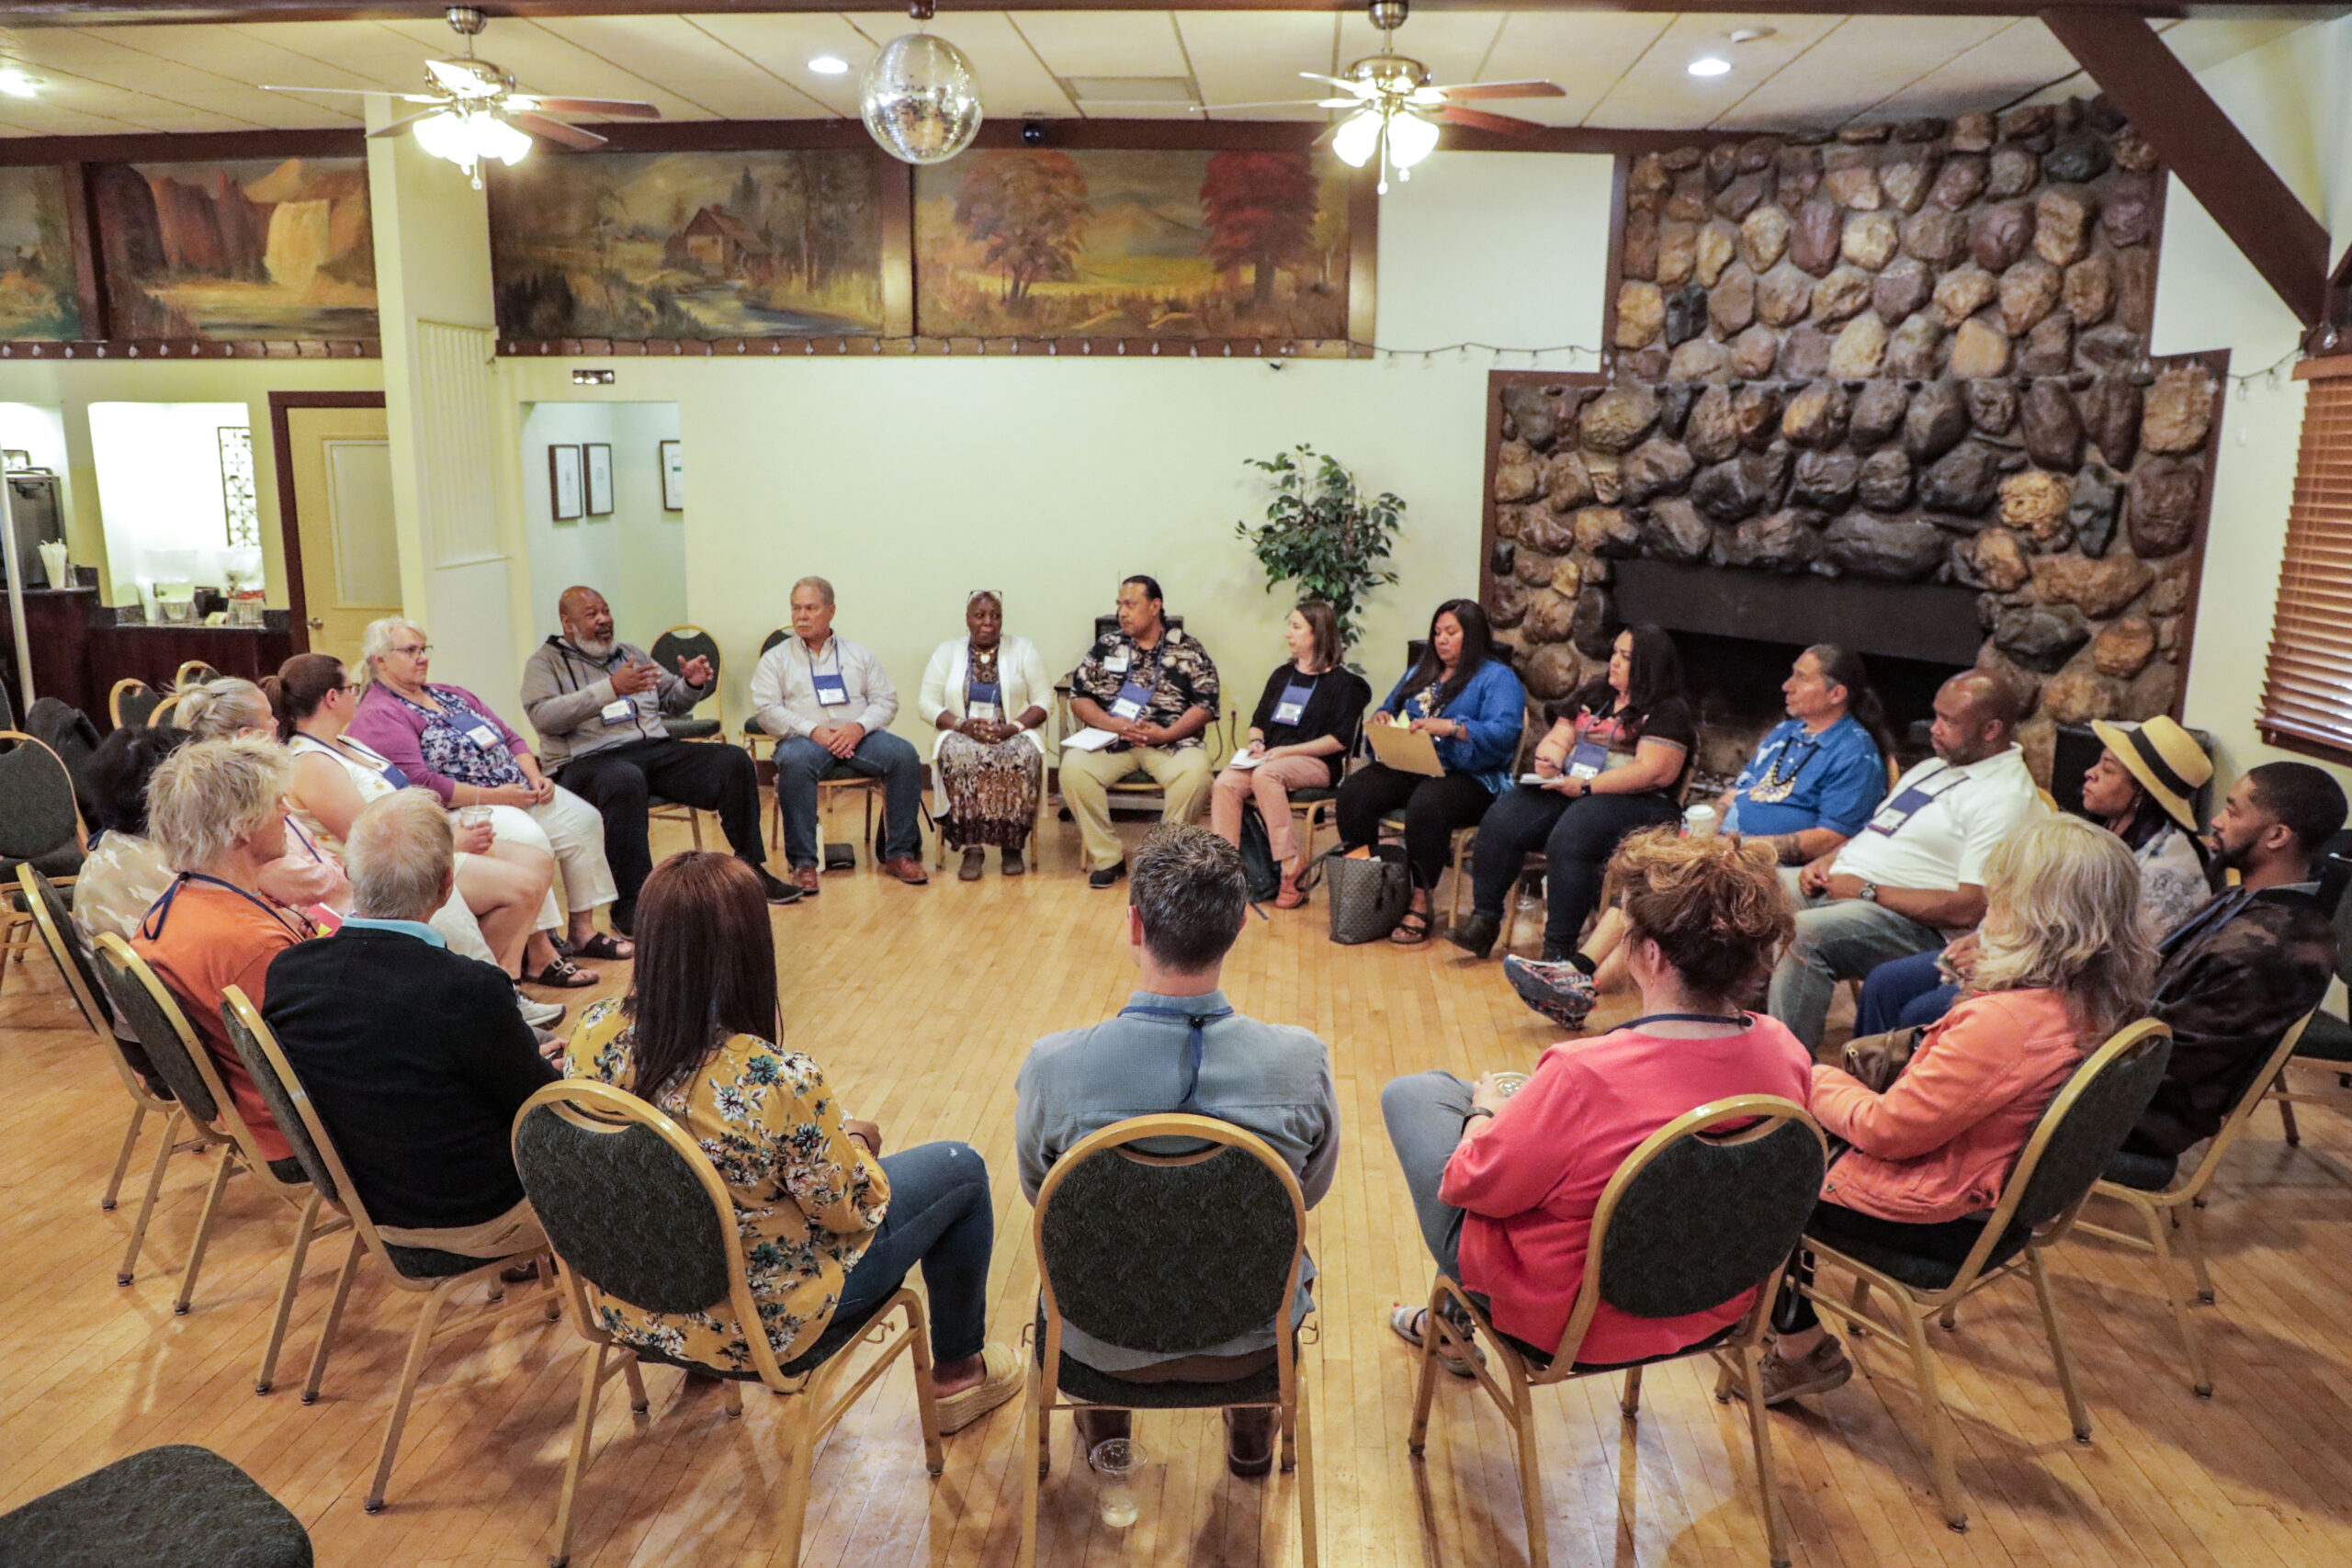 Marcus Robinson leads a workshop called "Being the Change" at the 2022 Wellville Gathering